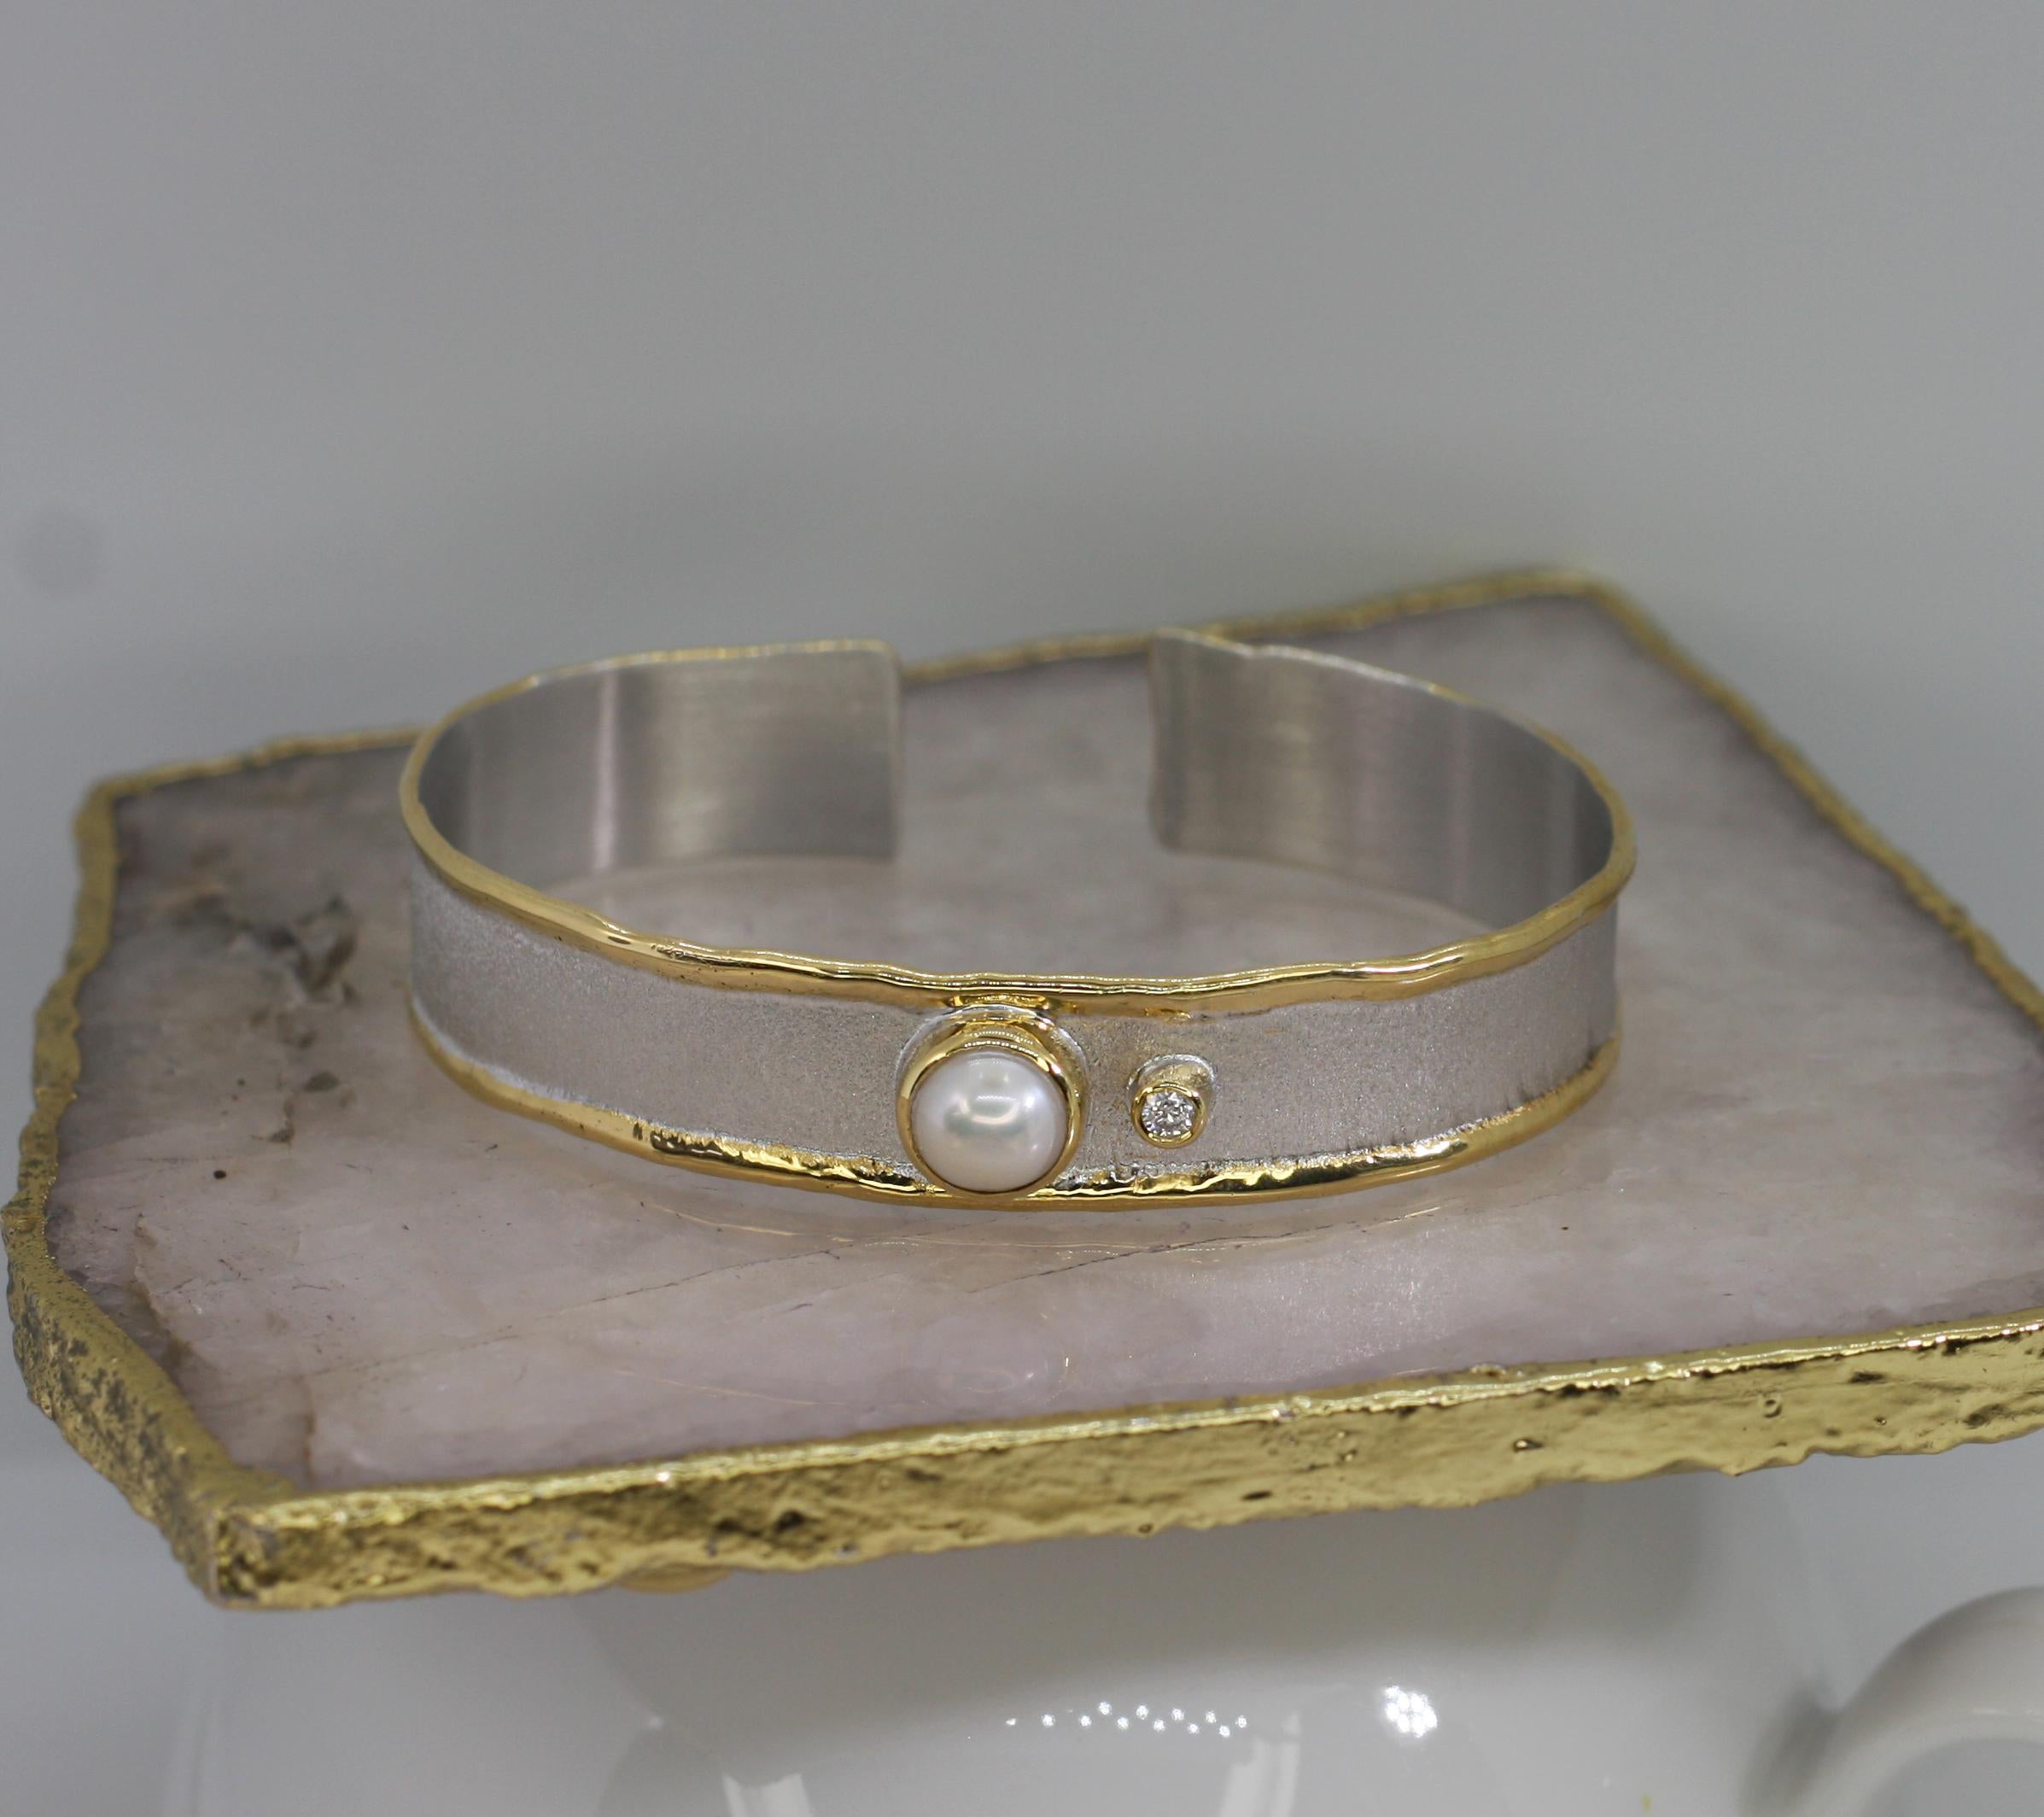 Yianni Creations cuff bracelet from Midas Collection all handcrafted from fine silver 950 purity and plated with palladium to resist the elements. This gorgeous artisan cuff bracelet features a natural Pearl accompanied by 0.07 Carat brilliant-cut